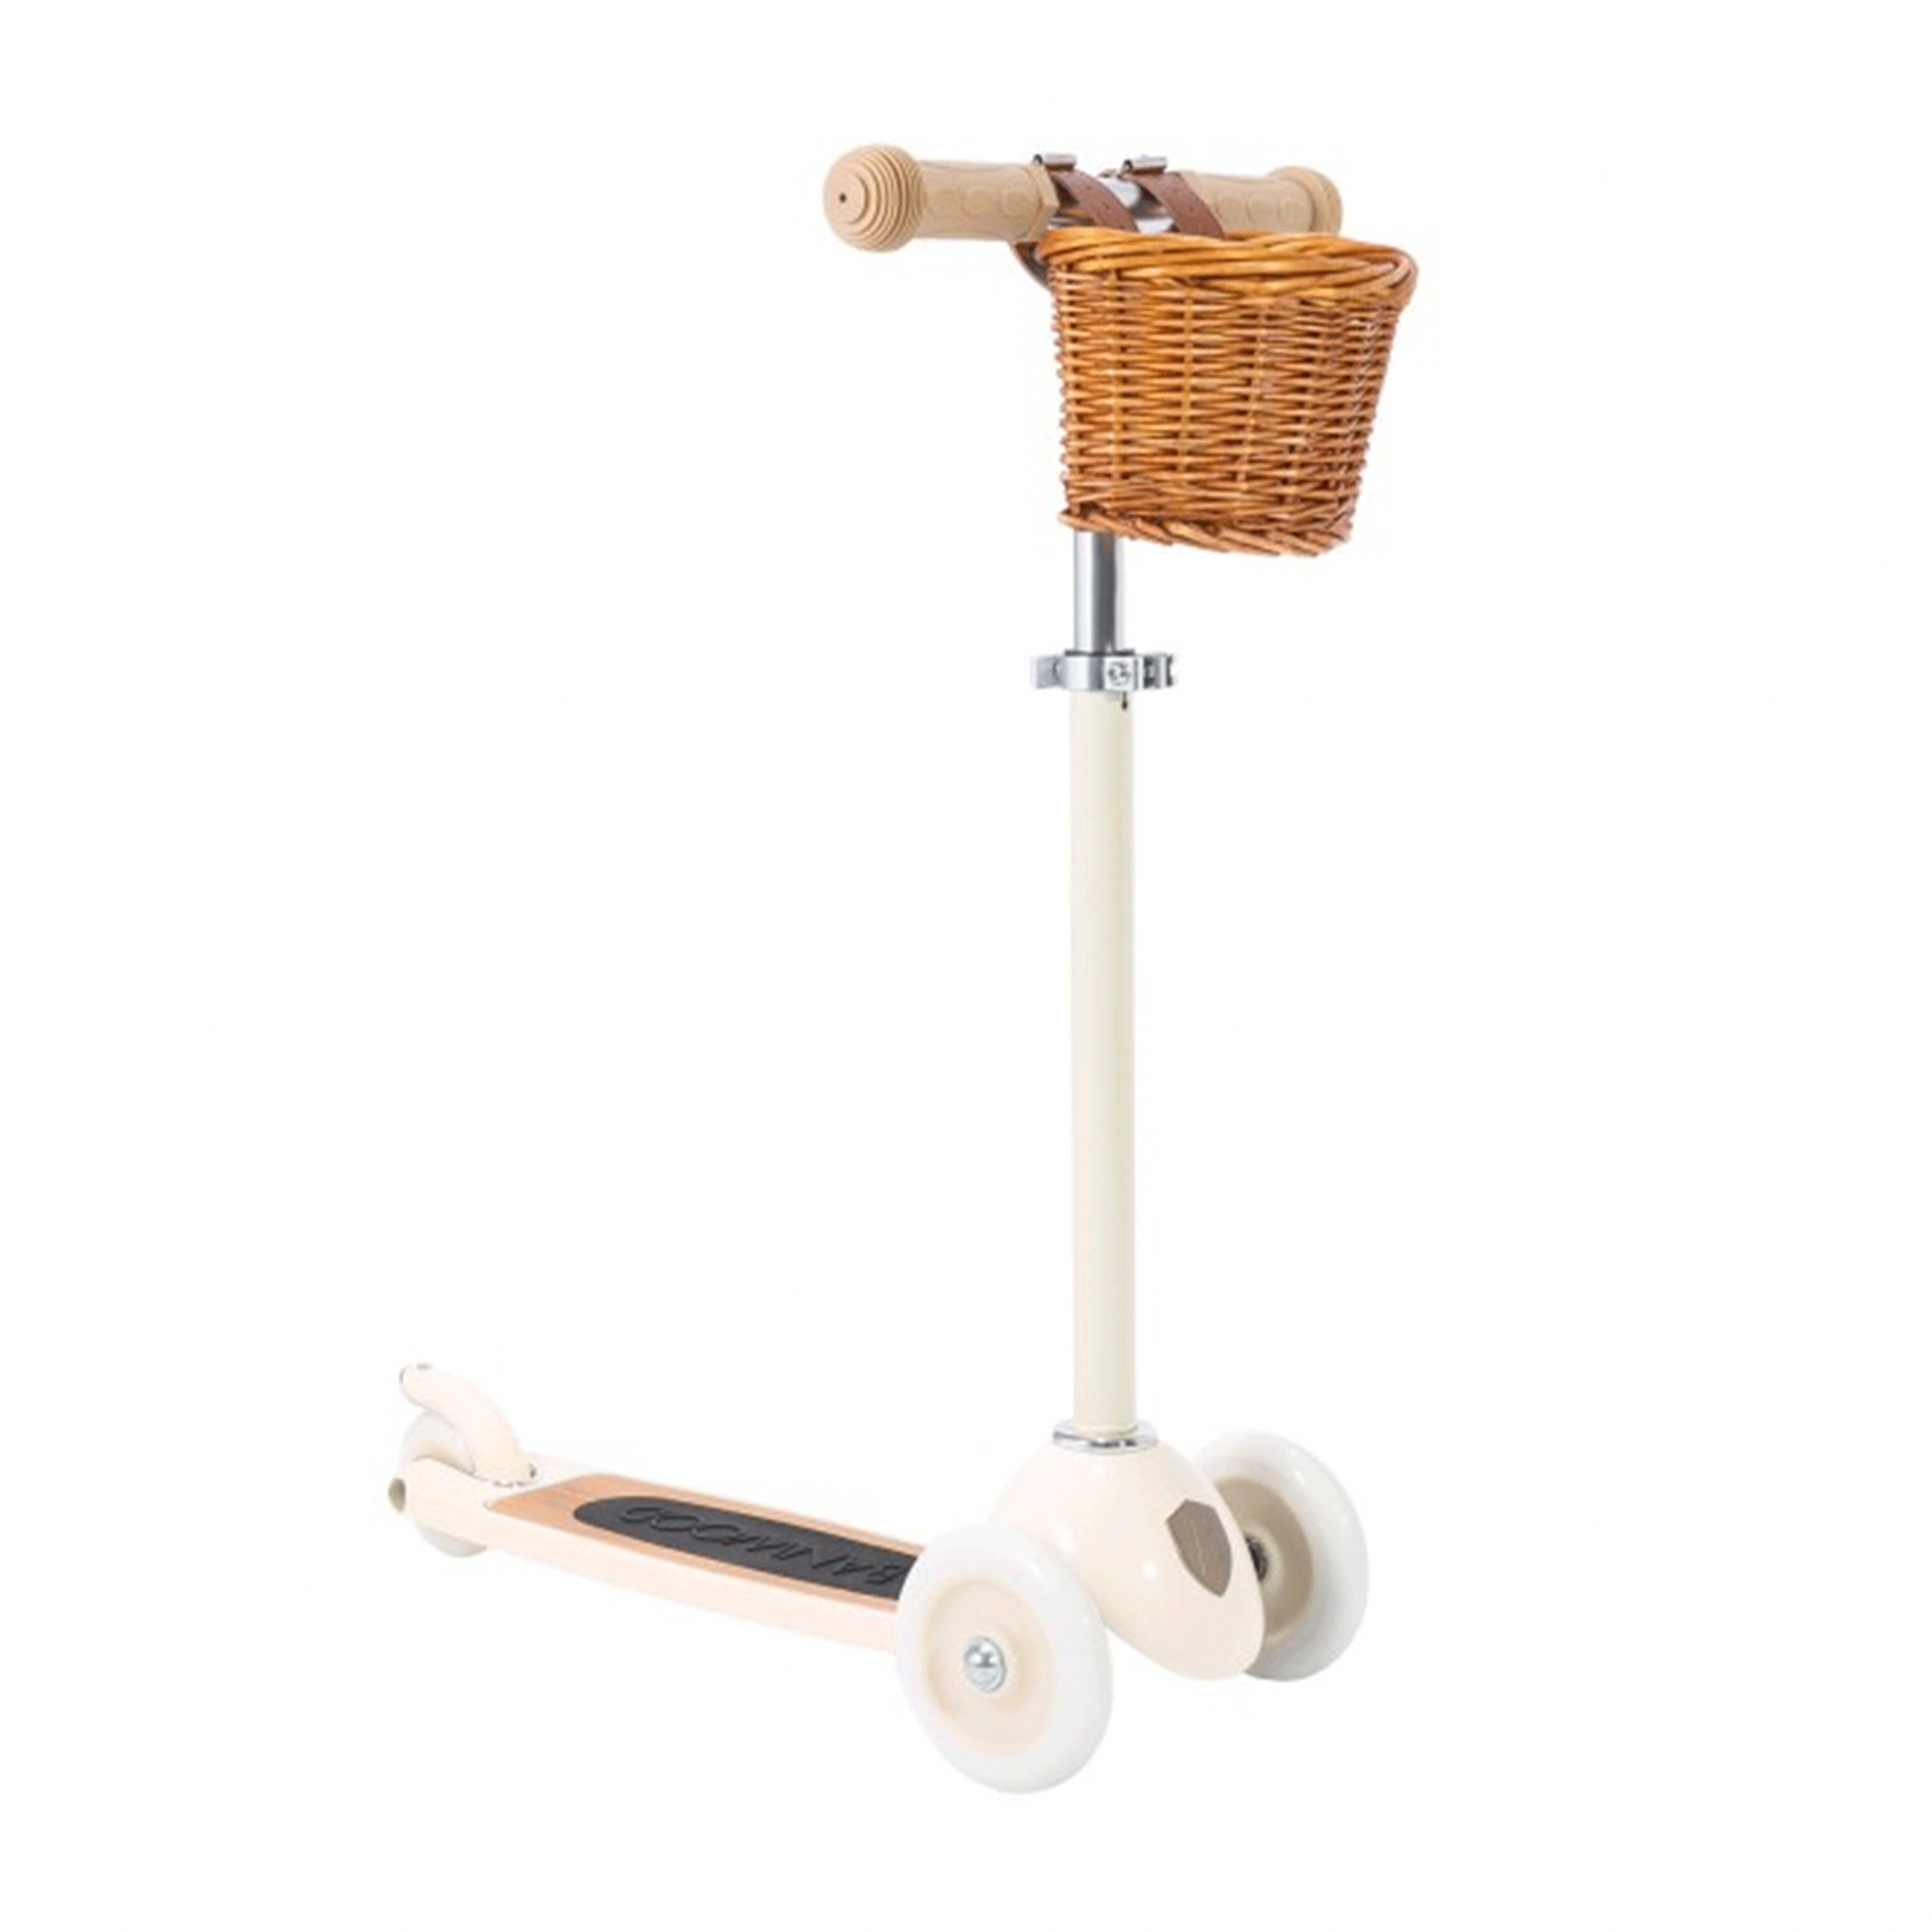 On a white background is a cream colored scooter with a basket on the front of the t-bar.